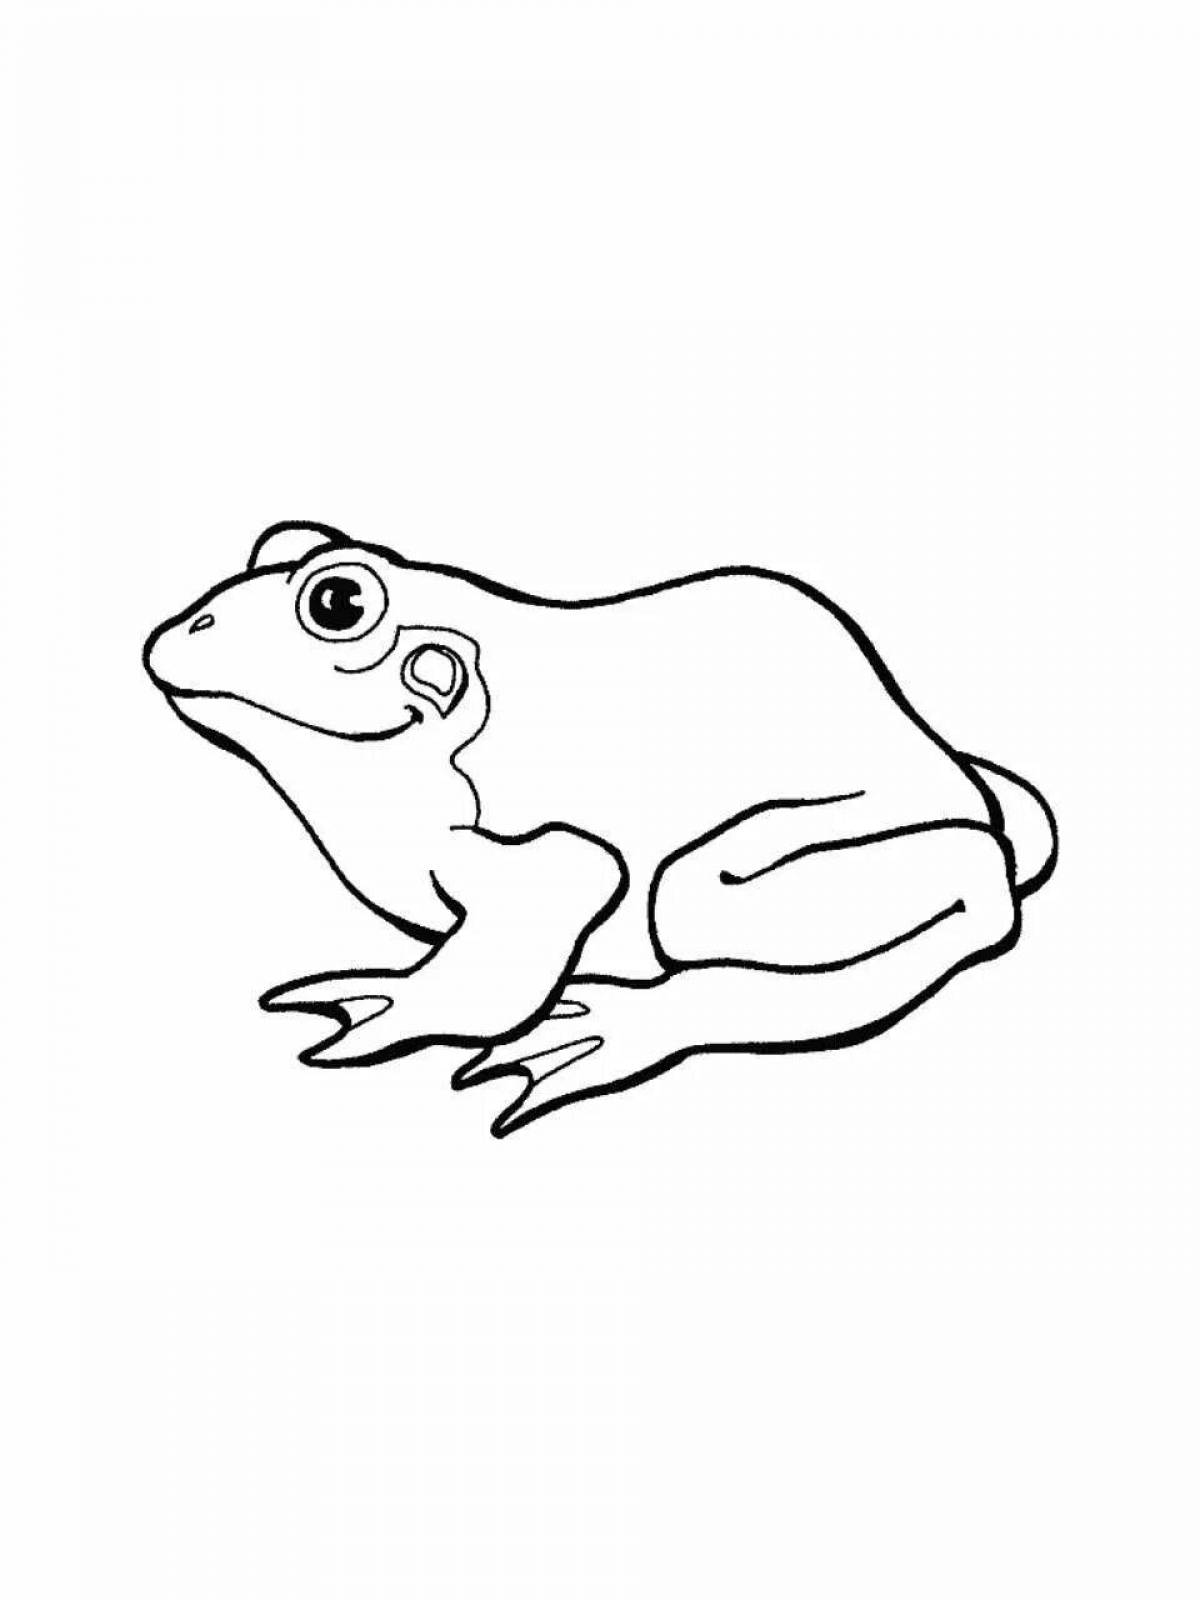 Vibrant frog coloring pages